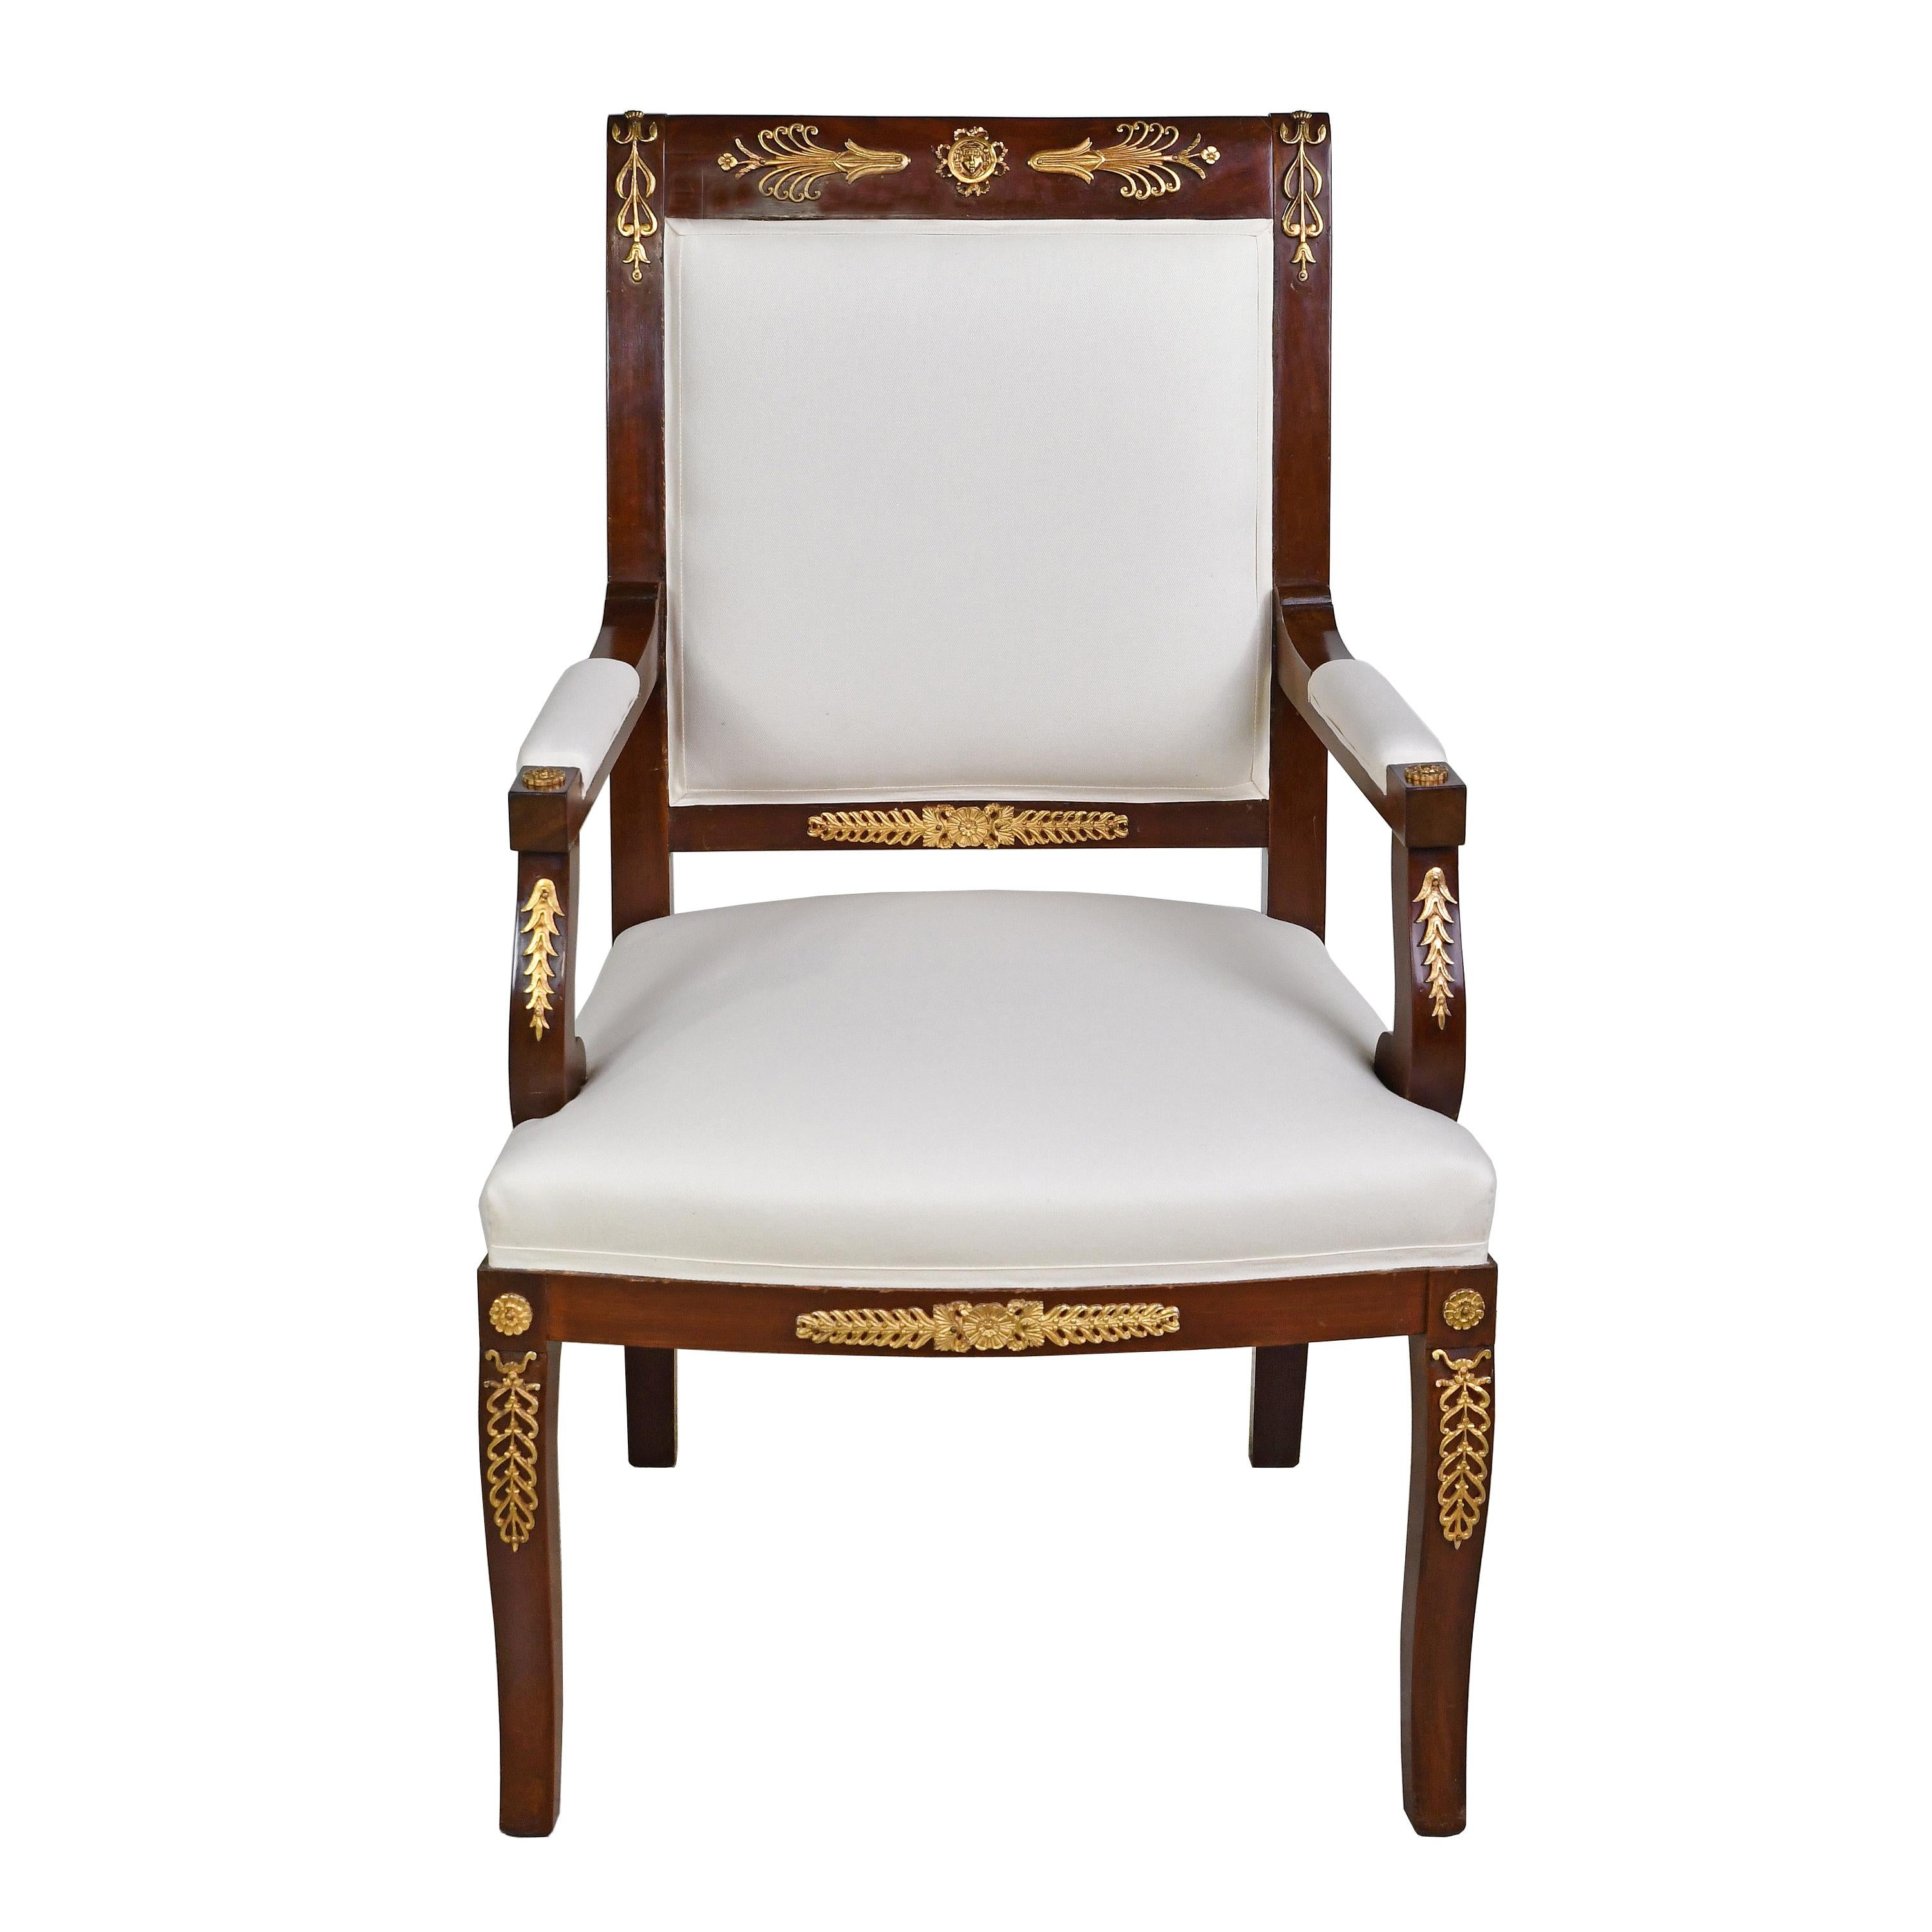 A handsome set of four Empire-style armchairs in a dark rich auburn brown mahogany with bronze doré ormolu mounts. Mounts embellish the frame with classical motifs that were popular during the French Empire like anthemion’s, palmettes, lotus flowers